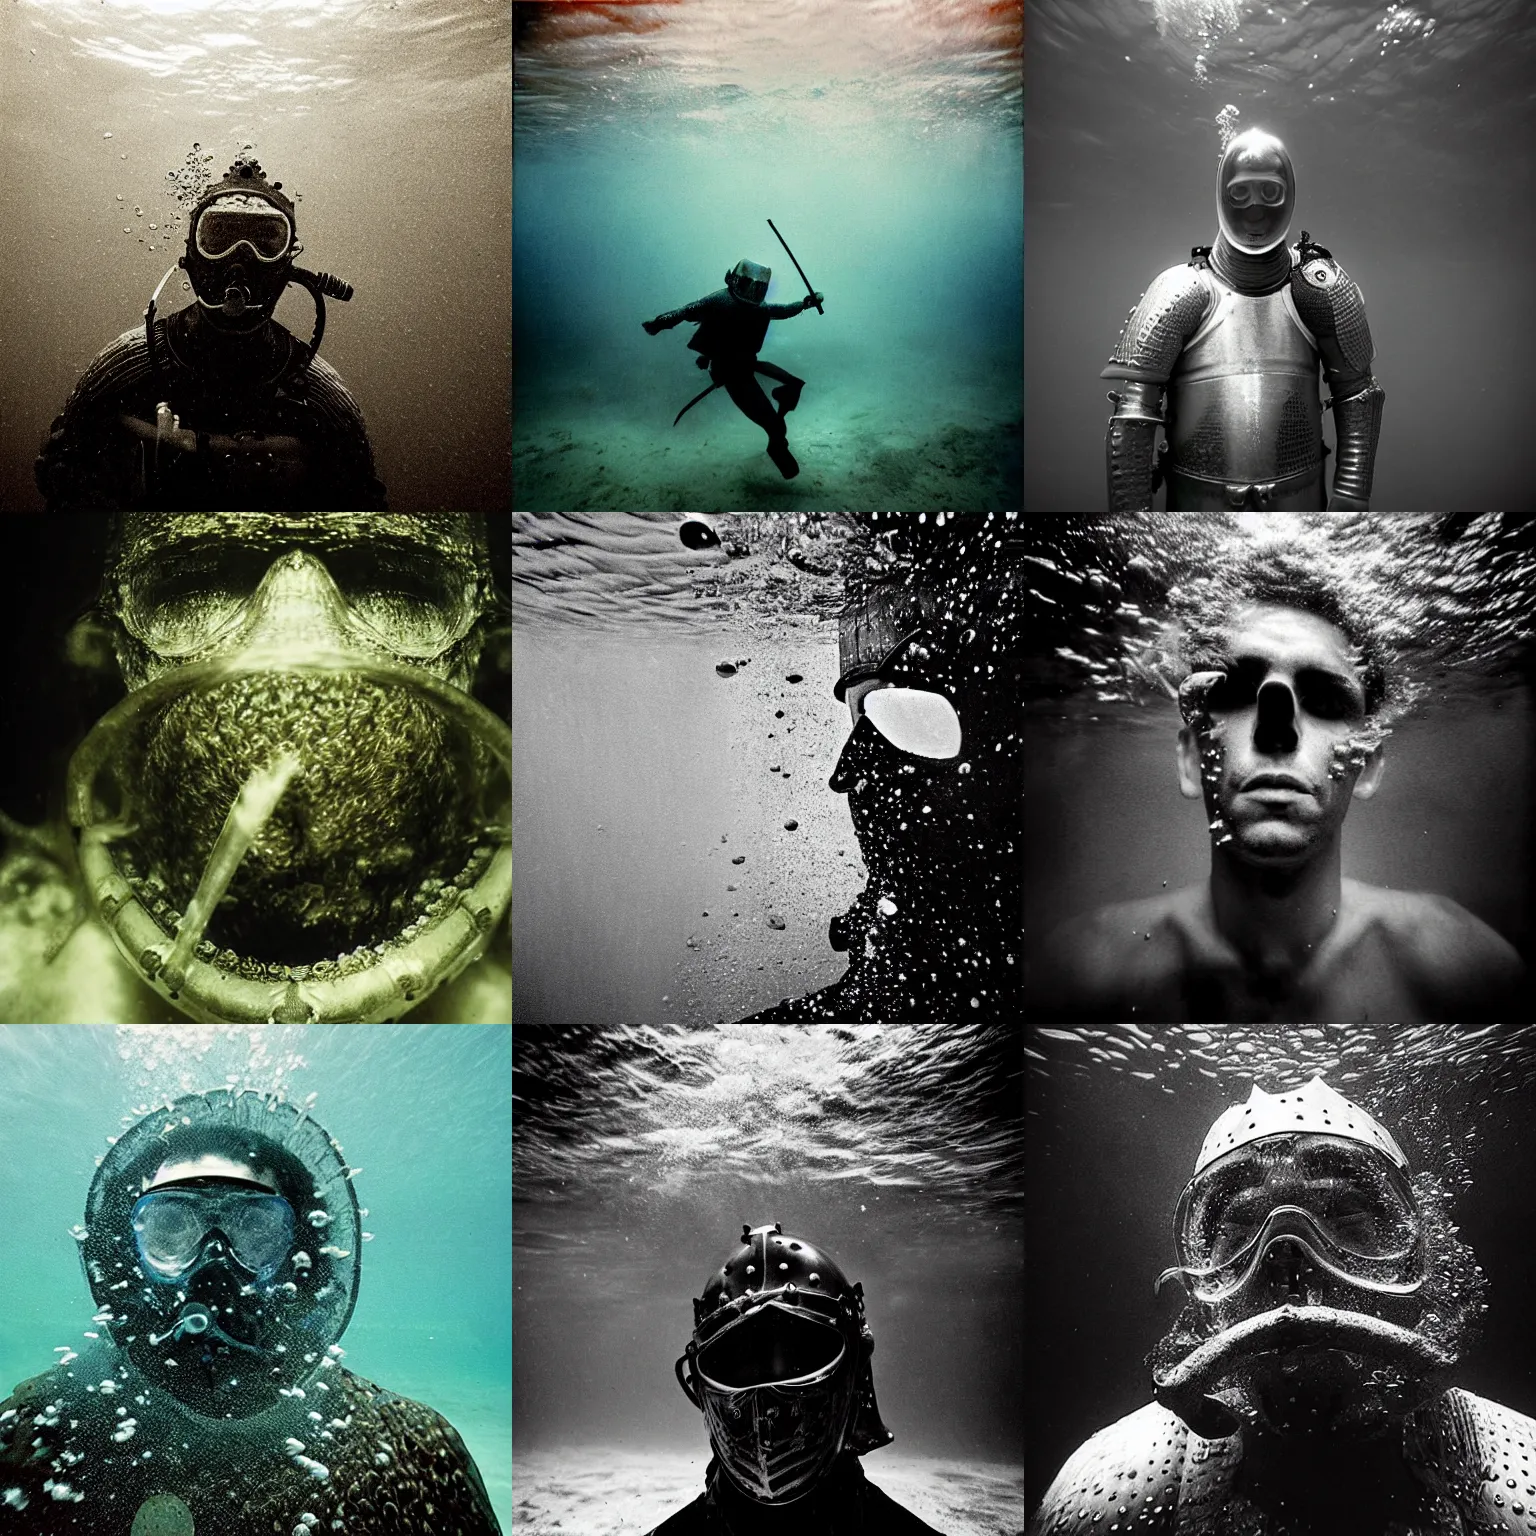 Prompt: Underwater close up portrait of a medieval knight by Trent Parke, clean, detailed, Magnum photos